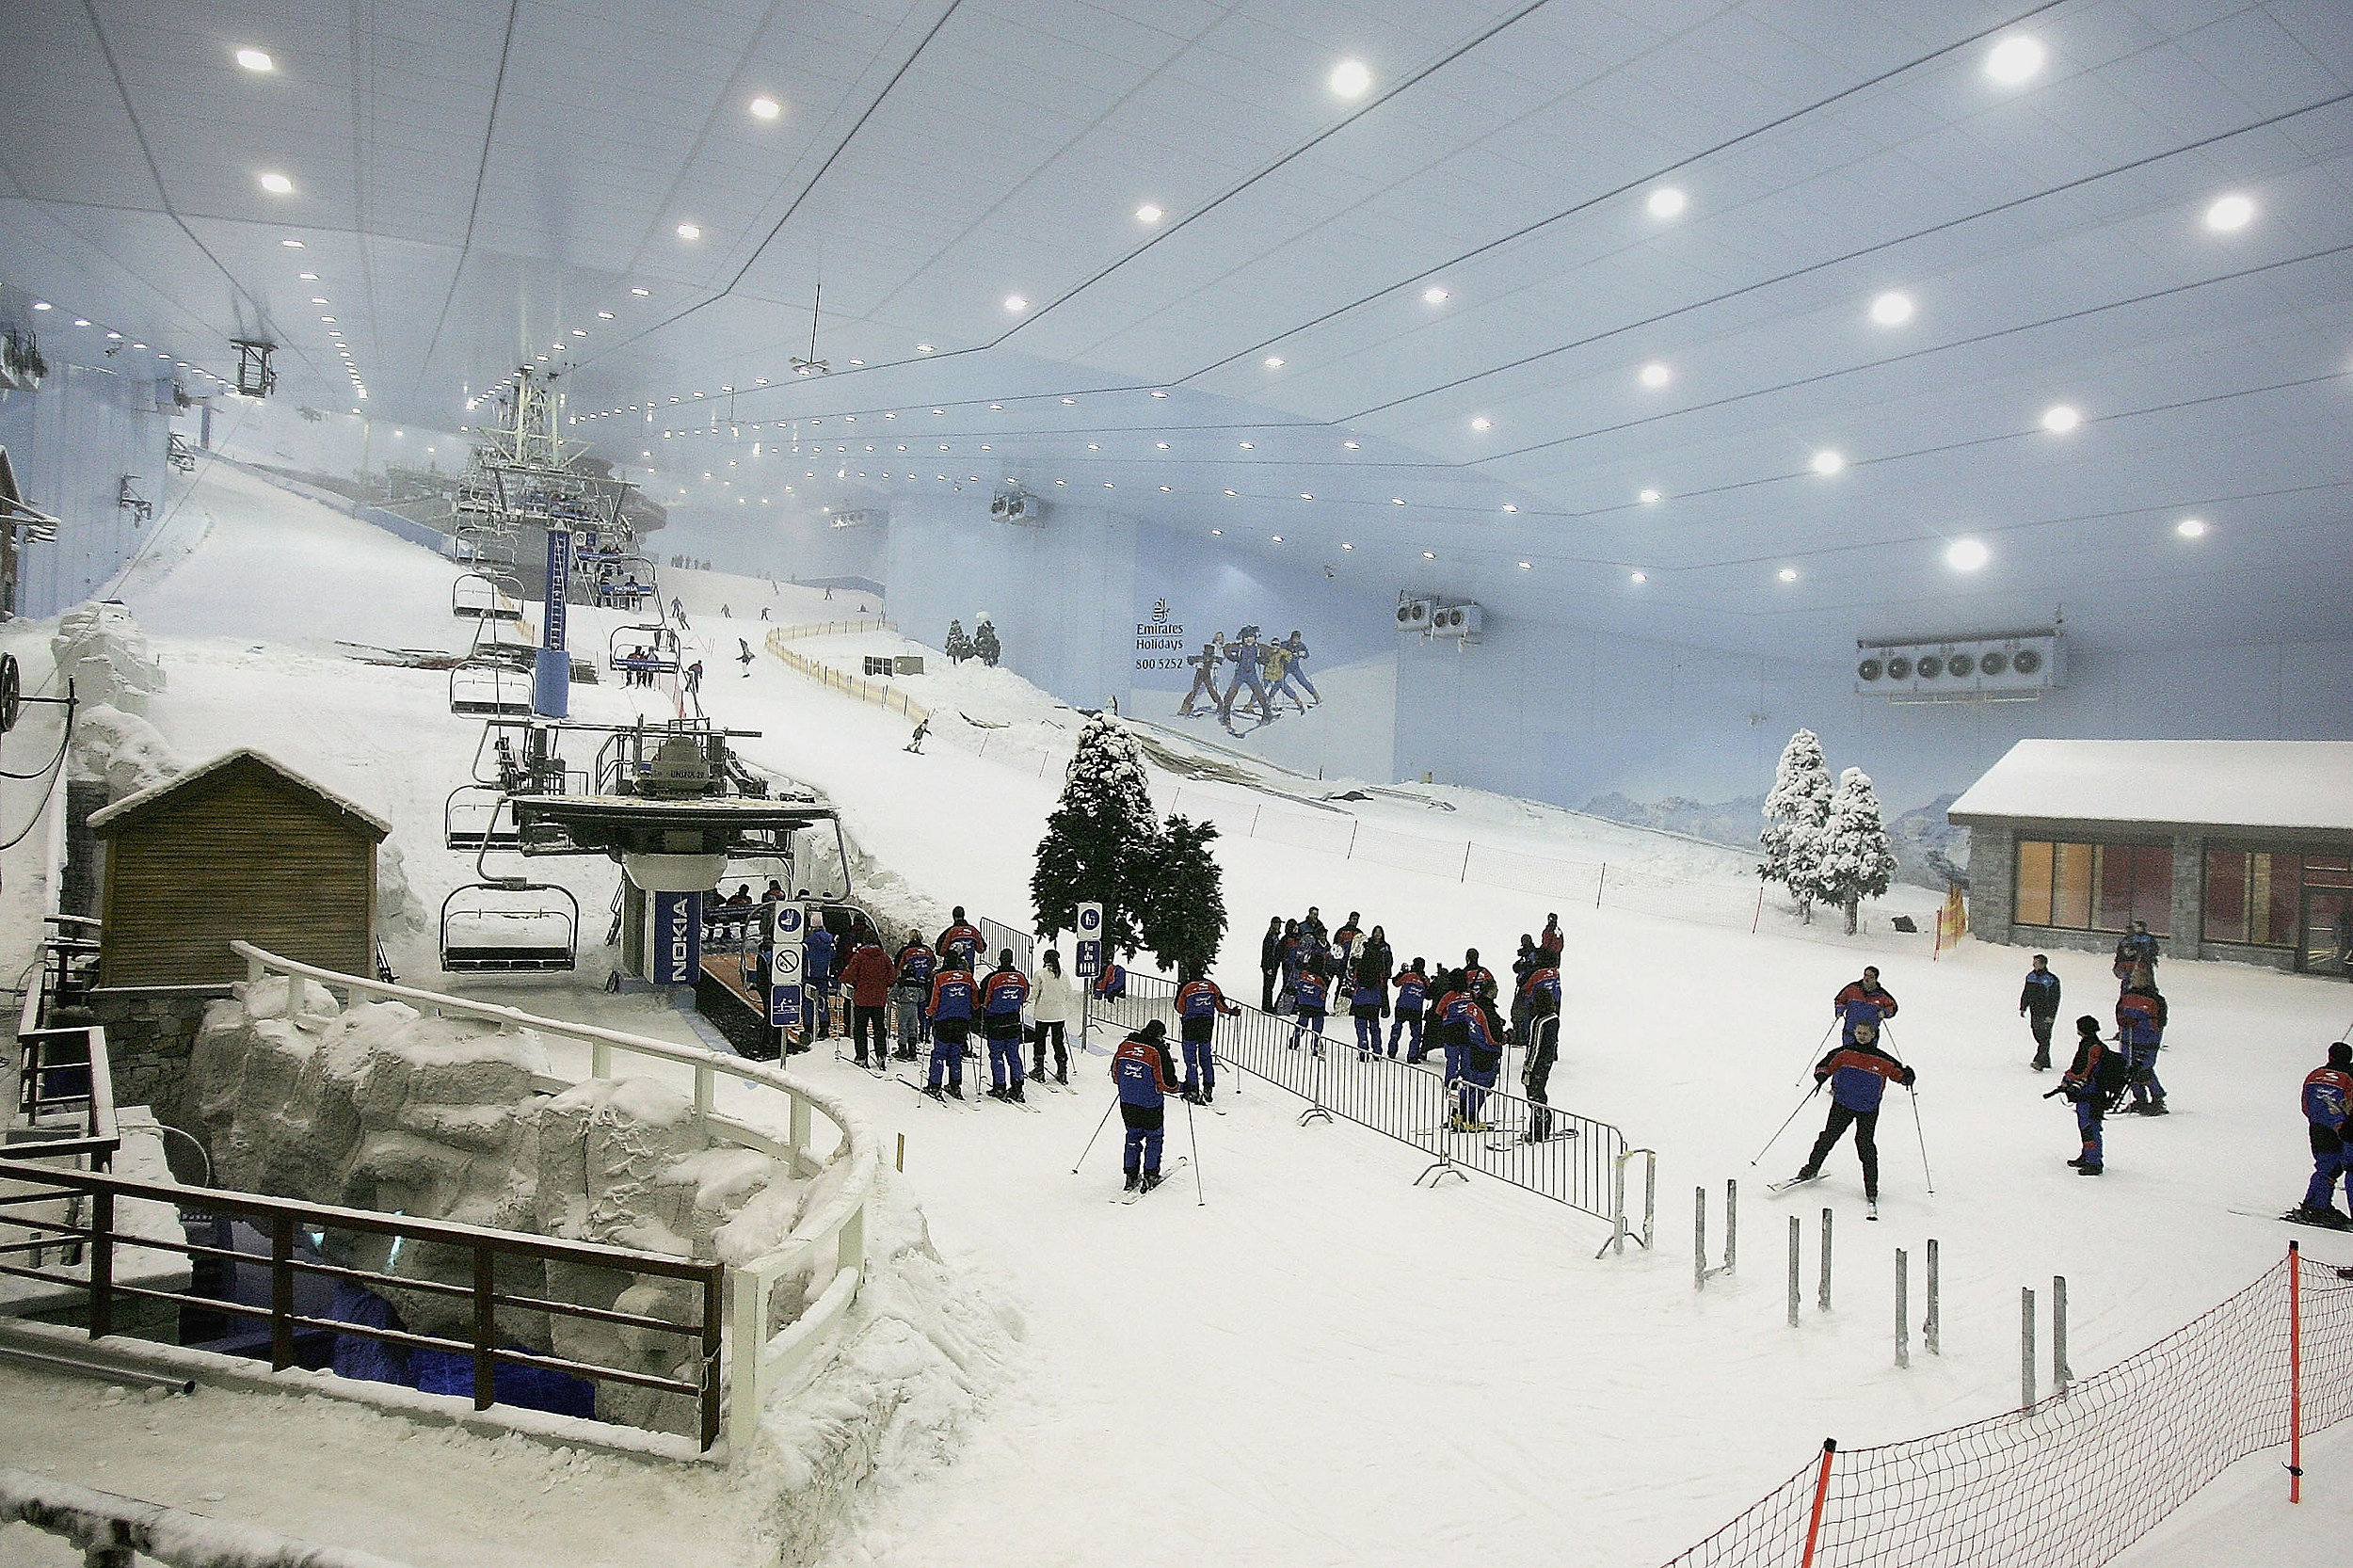 The dystopian experience of skiing in New Jersey's new American Dream mall